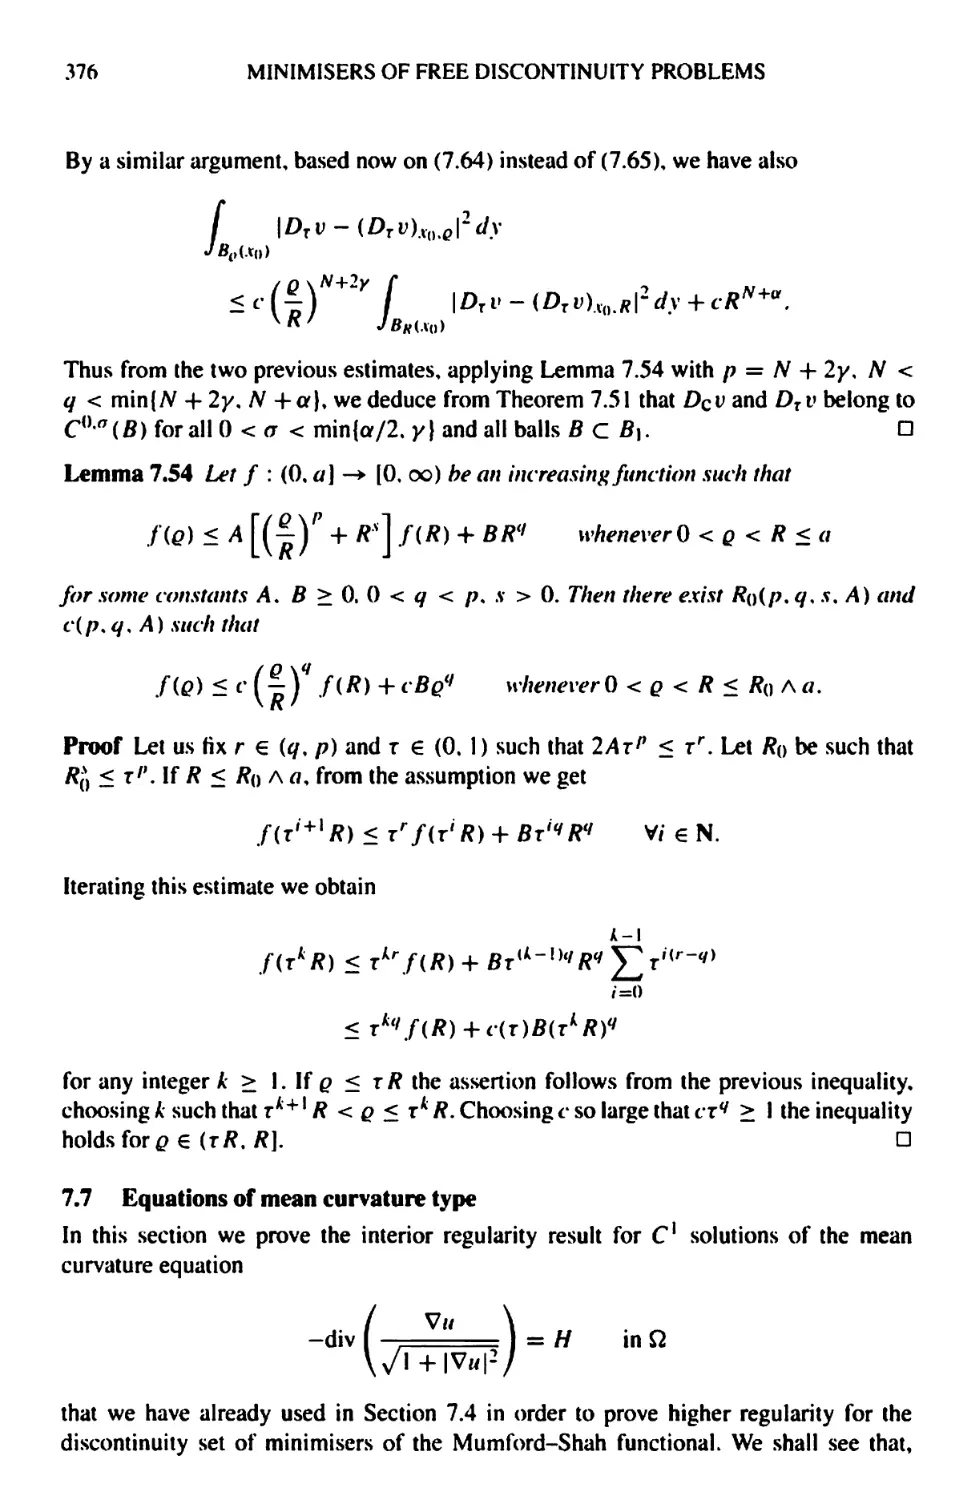 7.7 Equations of mean curvature type